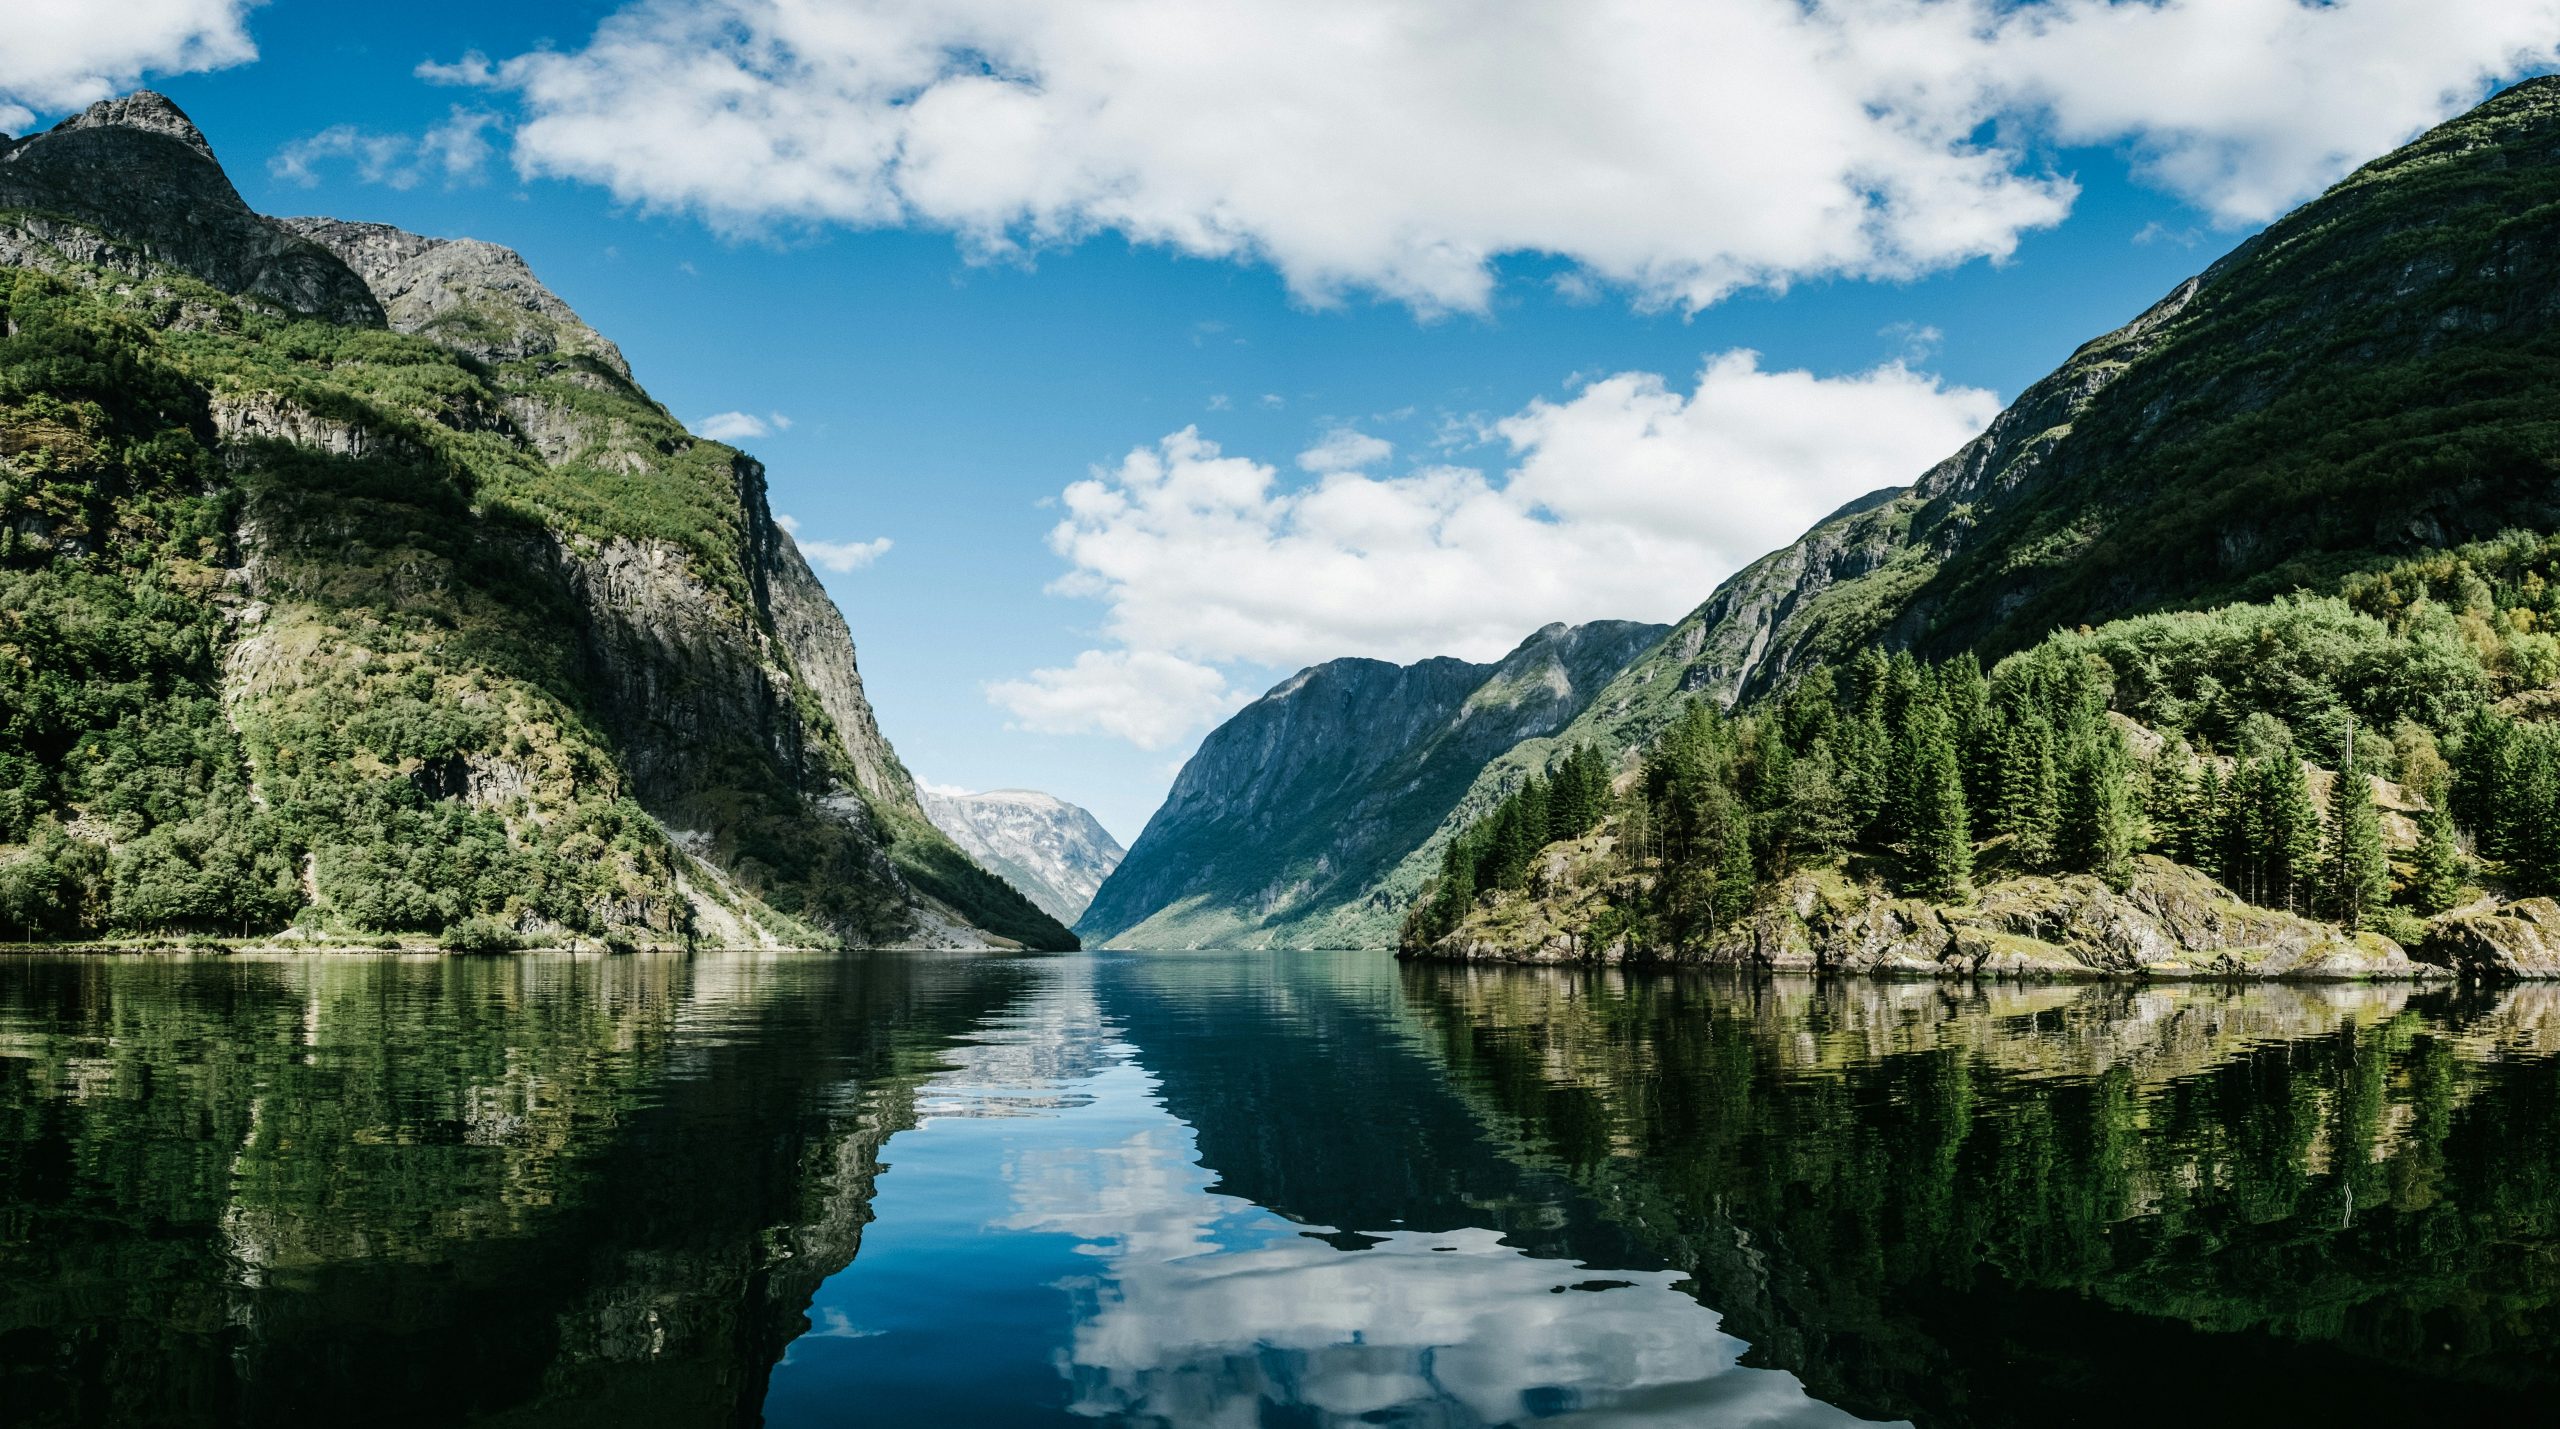 discover the breathtaking beauty of fjords with our immersive travel guide. explore the stunning landscapes and unique culture of fjord regions.